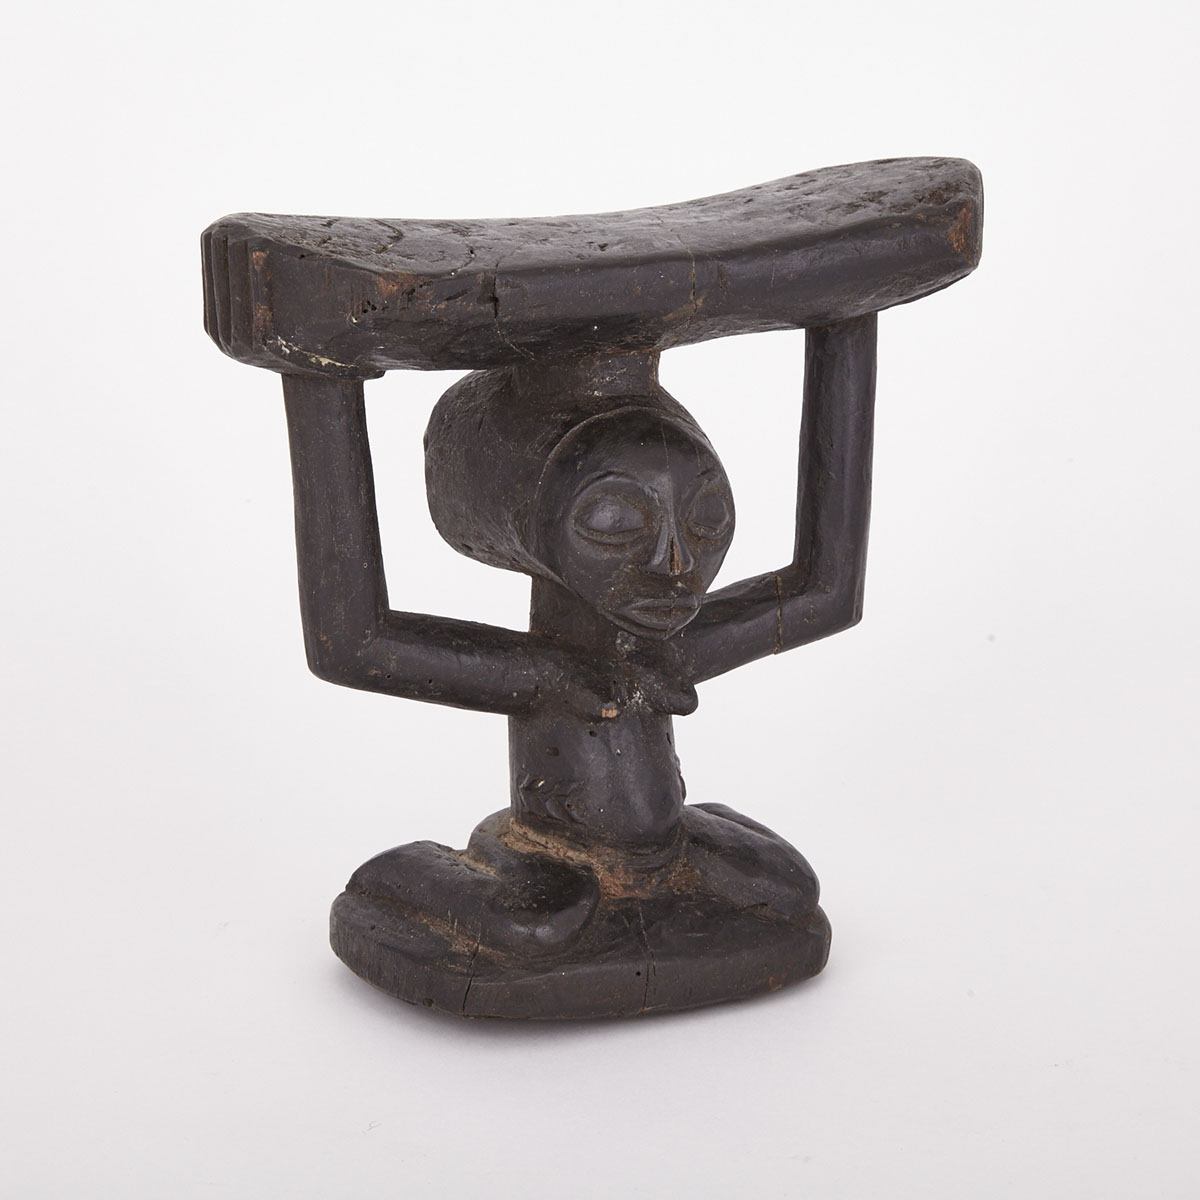 Luba Carved Wood Figurative Headrest, Central Africa, 20th century